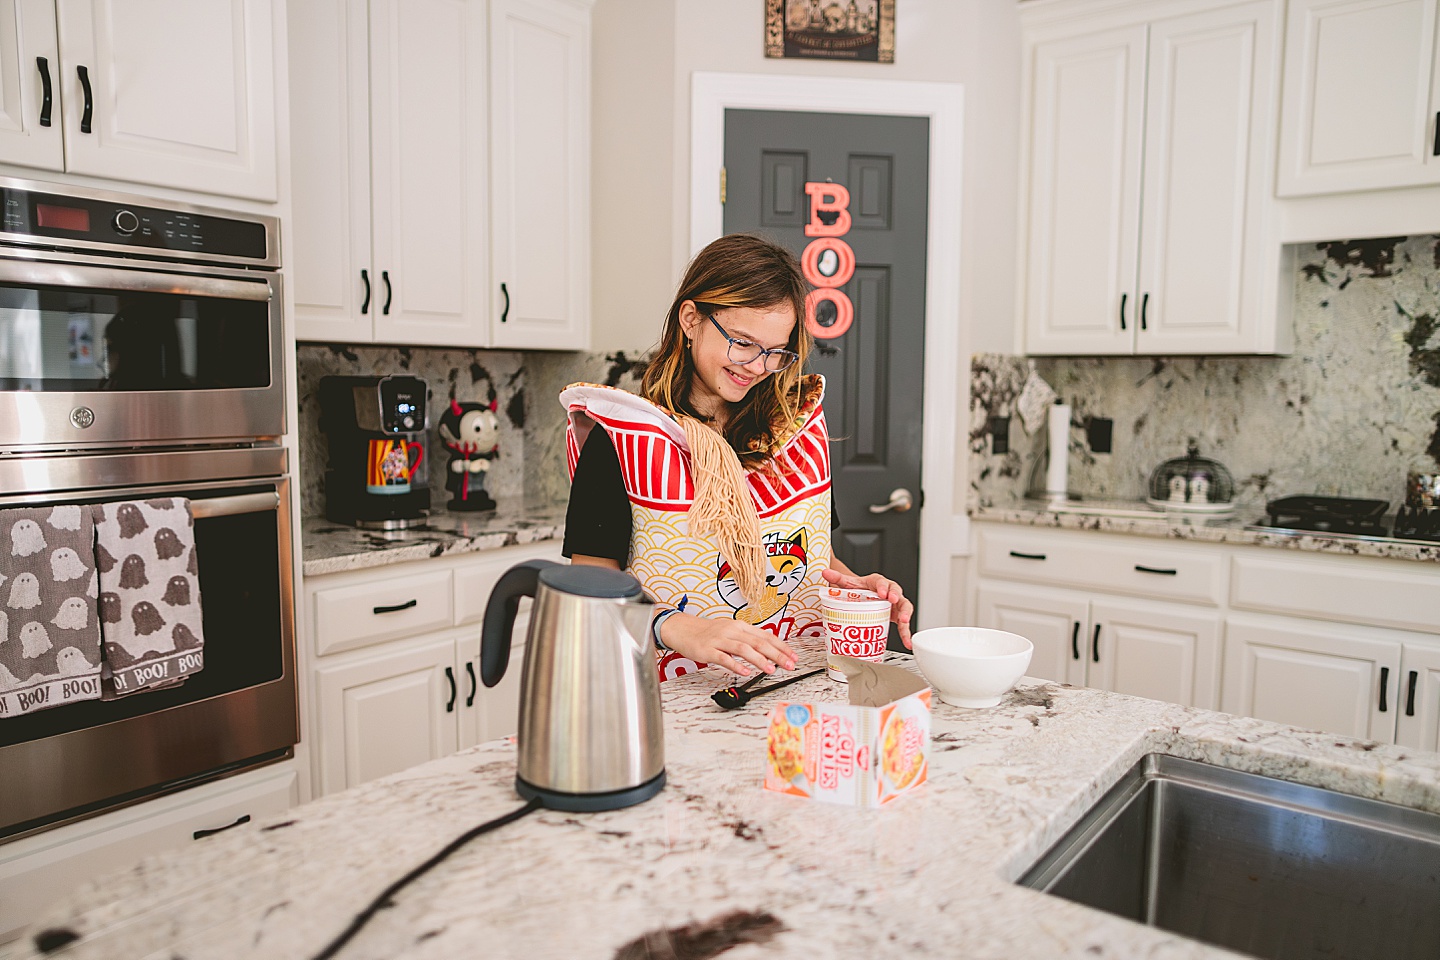 Girl prepares cup of noodle soup on kitchen counter